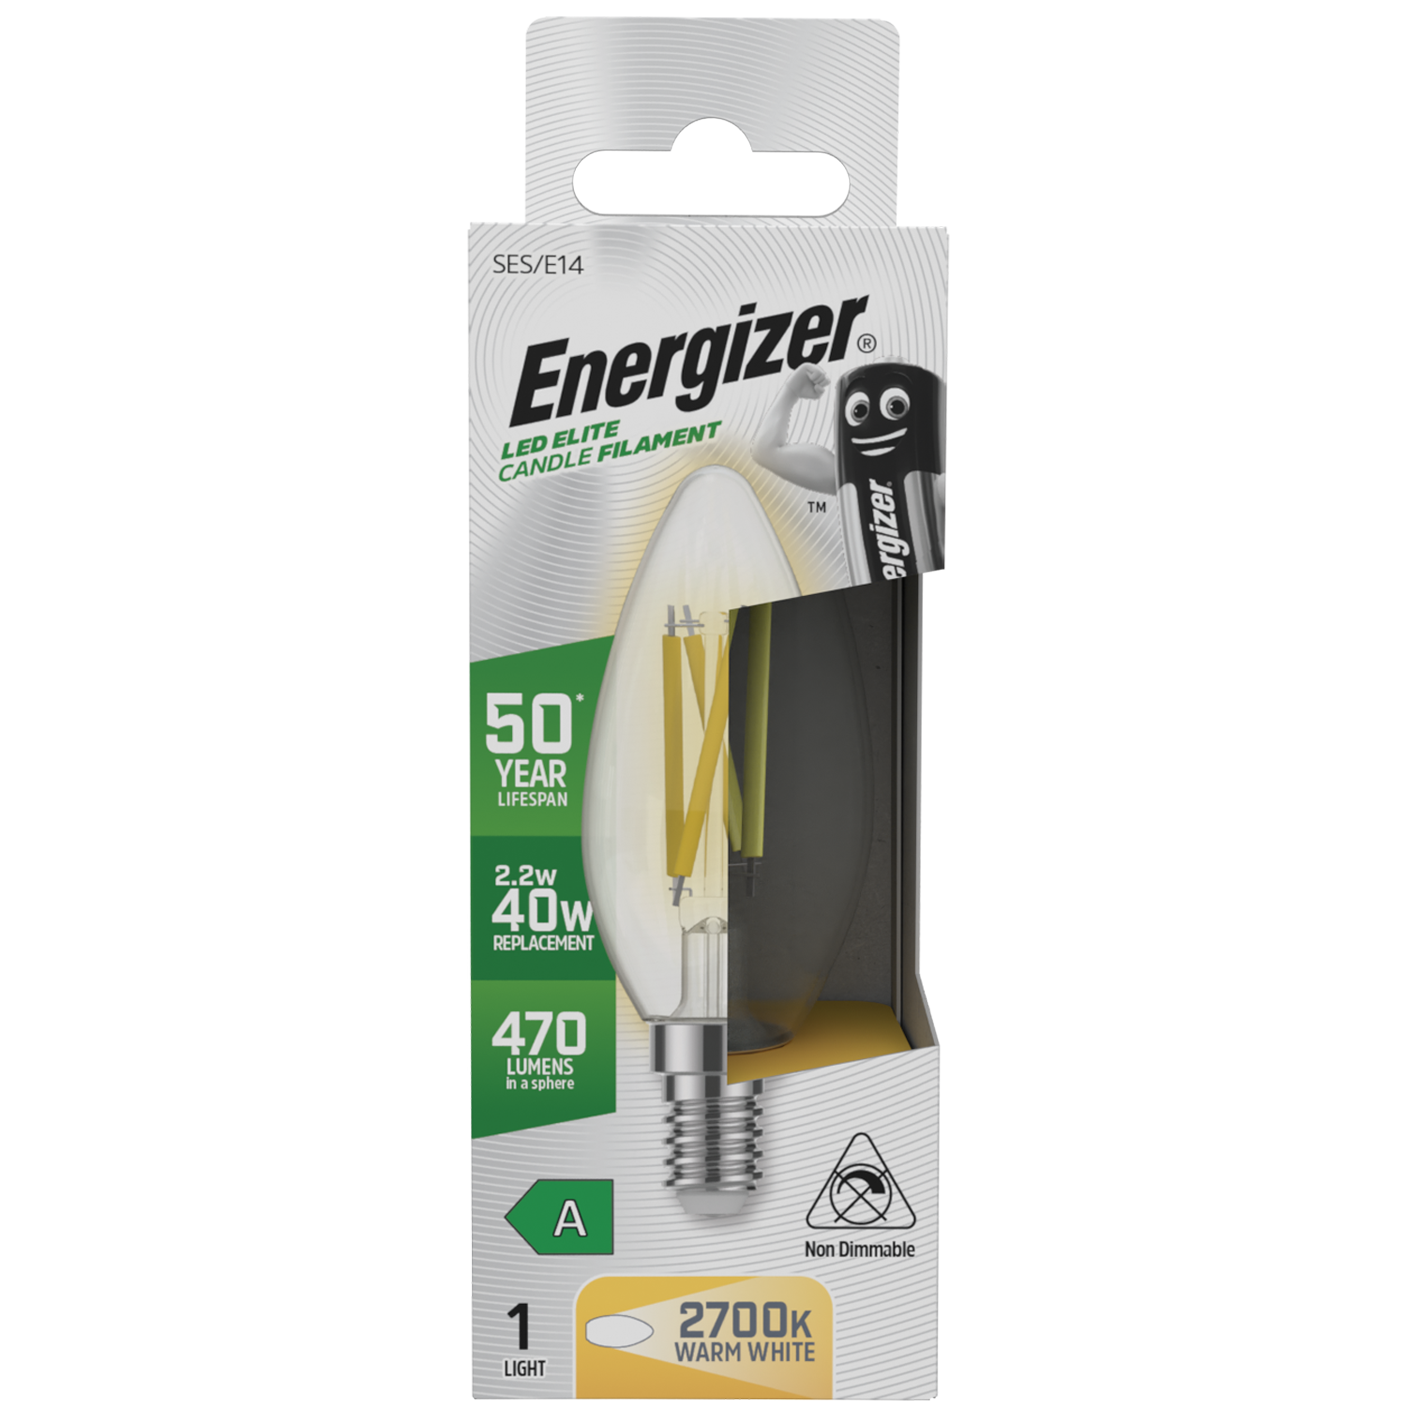 S29640 Energizer A Rated LED Elite Candle E14 Filament 470lm 2.2W 2700K (Warm White) - Box of 1